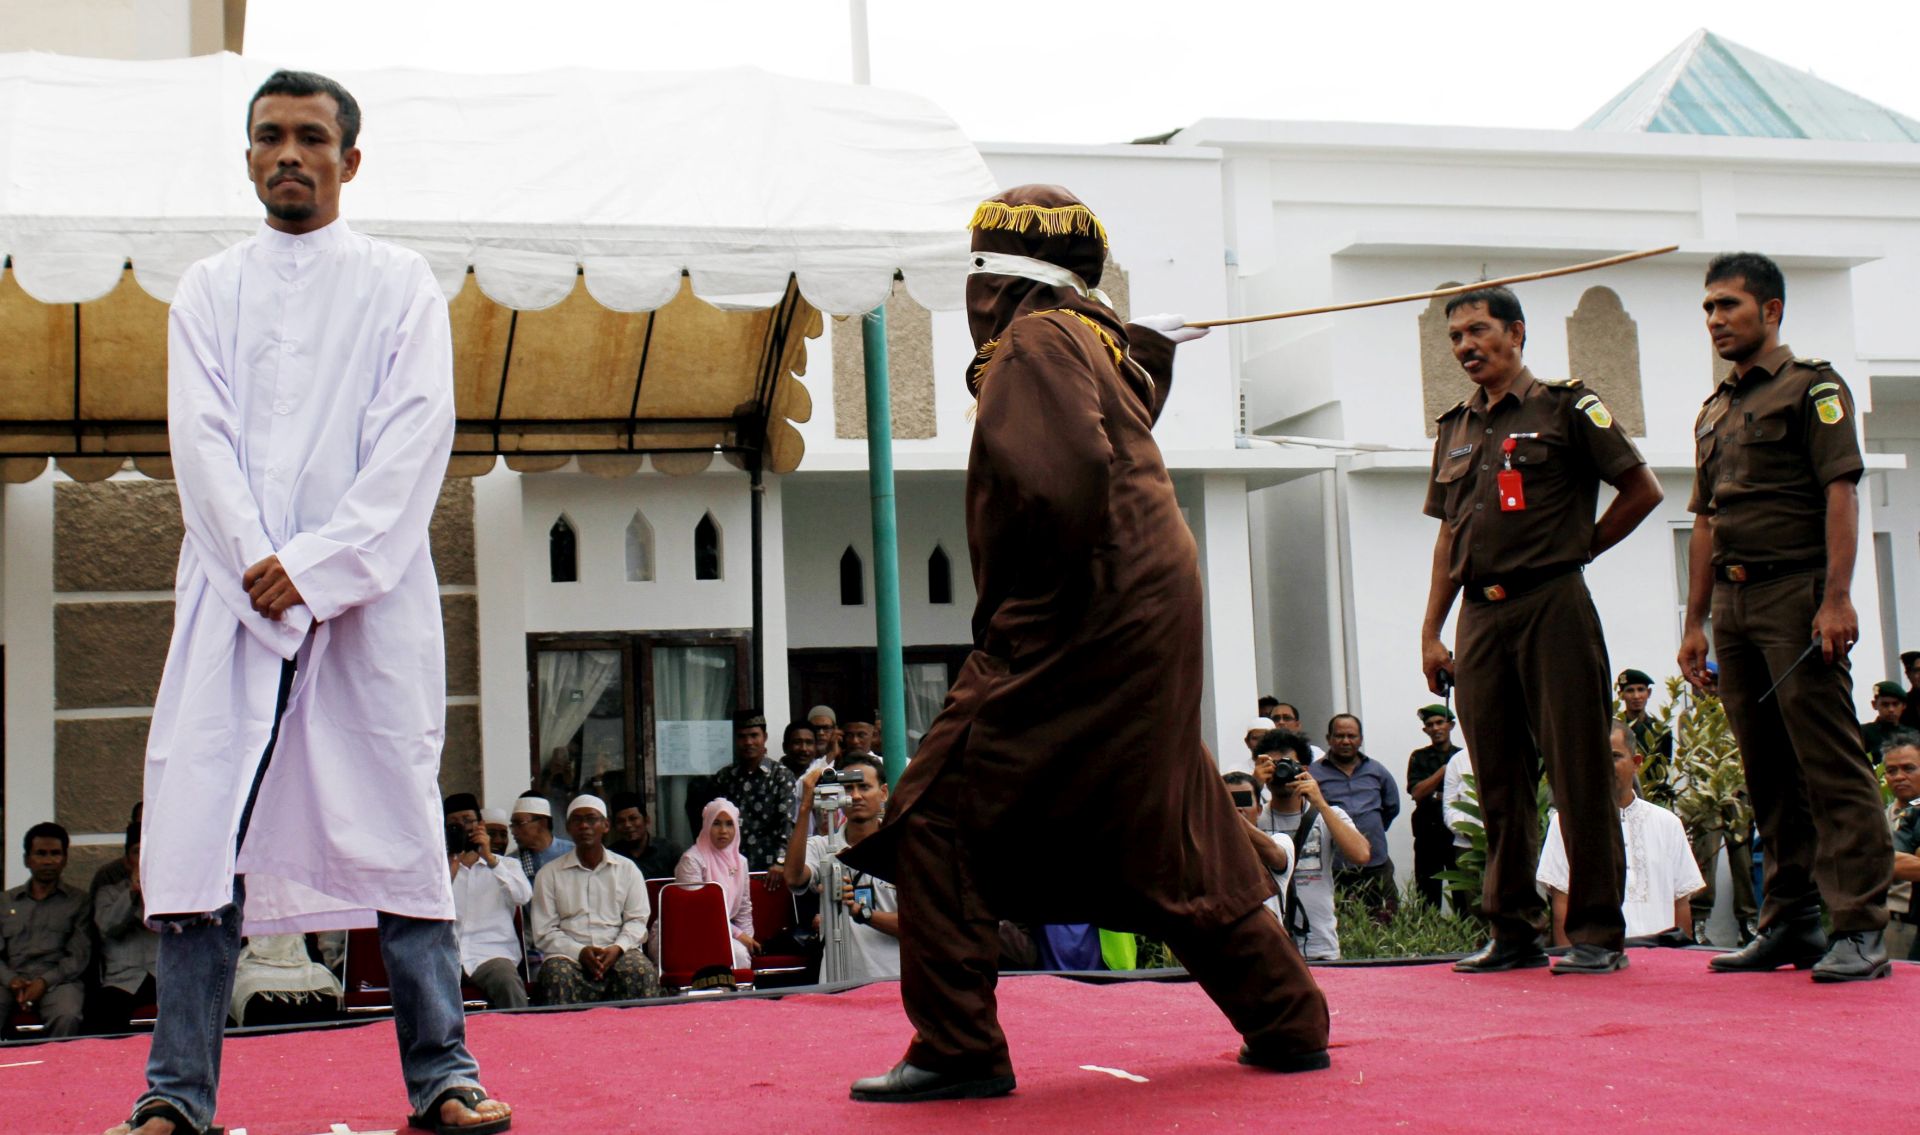 epa04429686 A gambler is publicly caned for breaking the Shariah Law outside of Al Makmur Mosque in Lampriet, Banda Aceh, Indonesia, 03 October 2014. Aceh is the only province in Indonesia that implements Syariah Law as a public law, and caning is one of the punishments. Amnesty International criticized the law 'an enormous step backwards for human rights.' Amnesty said at least 156 people have been caned in Aceh since 2010 for offences such as gambling, mixing with the opposite sex and selling food during the Ramadan fasting month.  EPA/GIBRAN